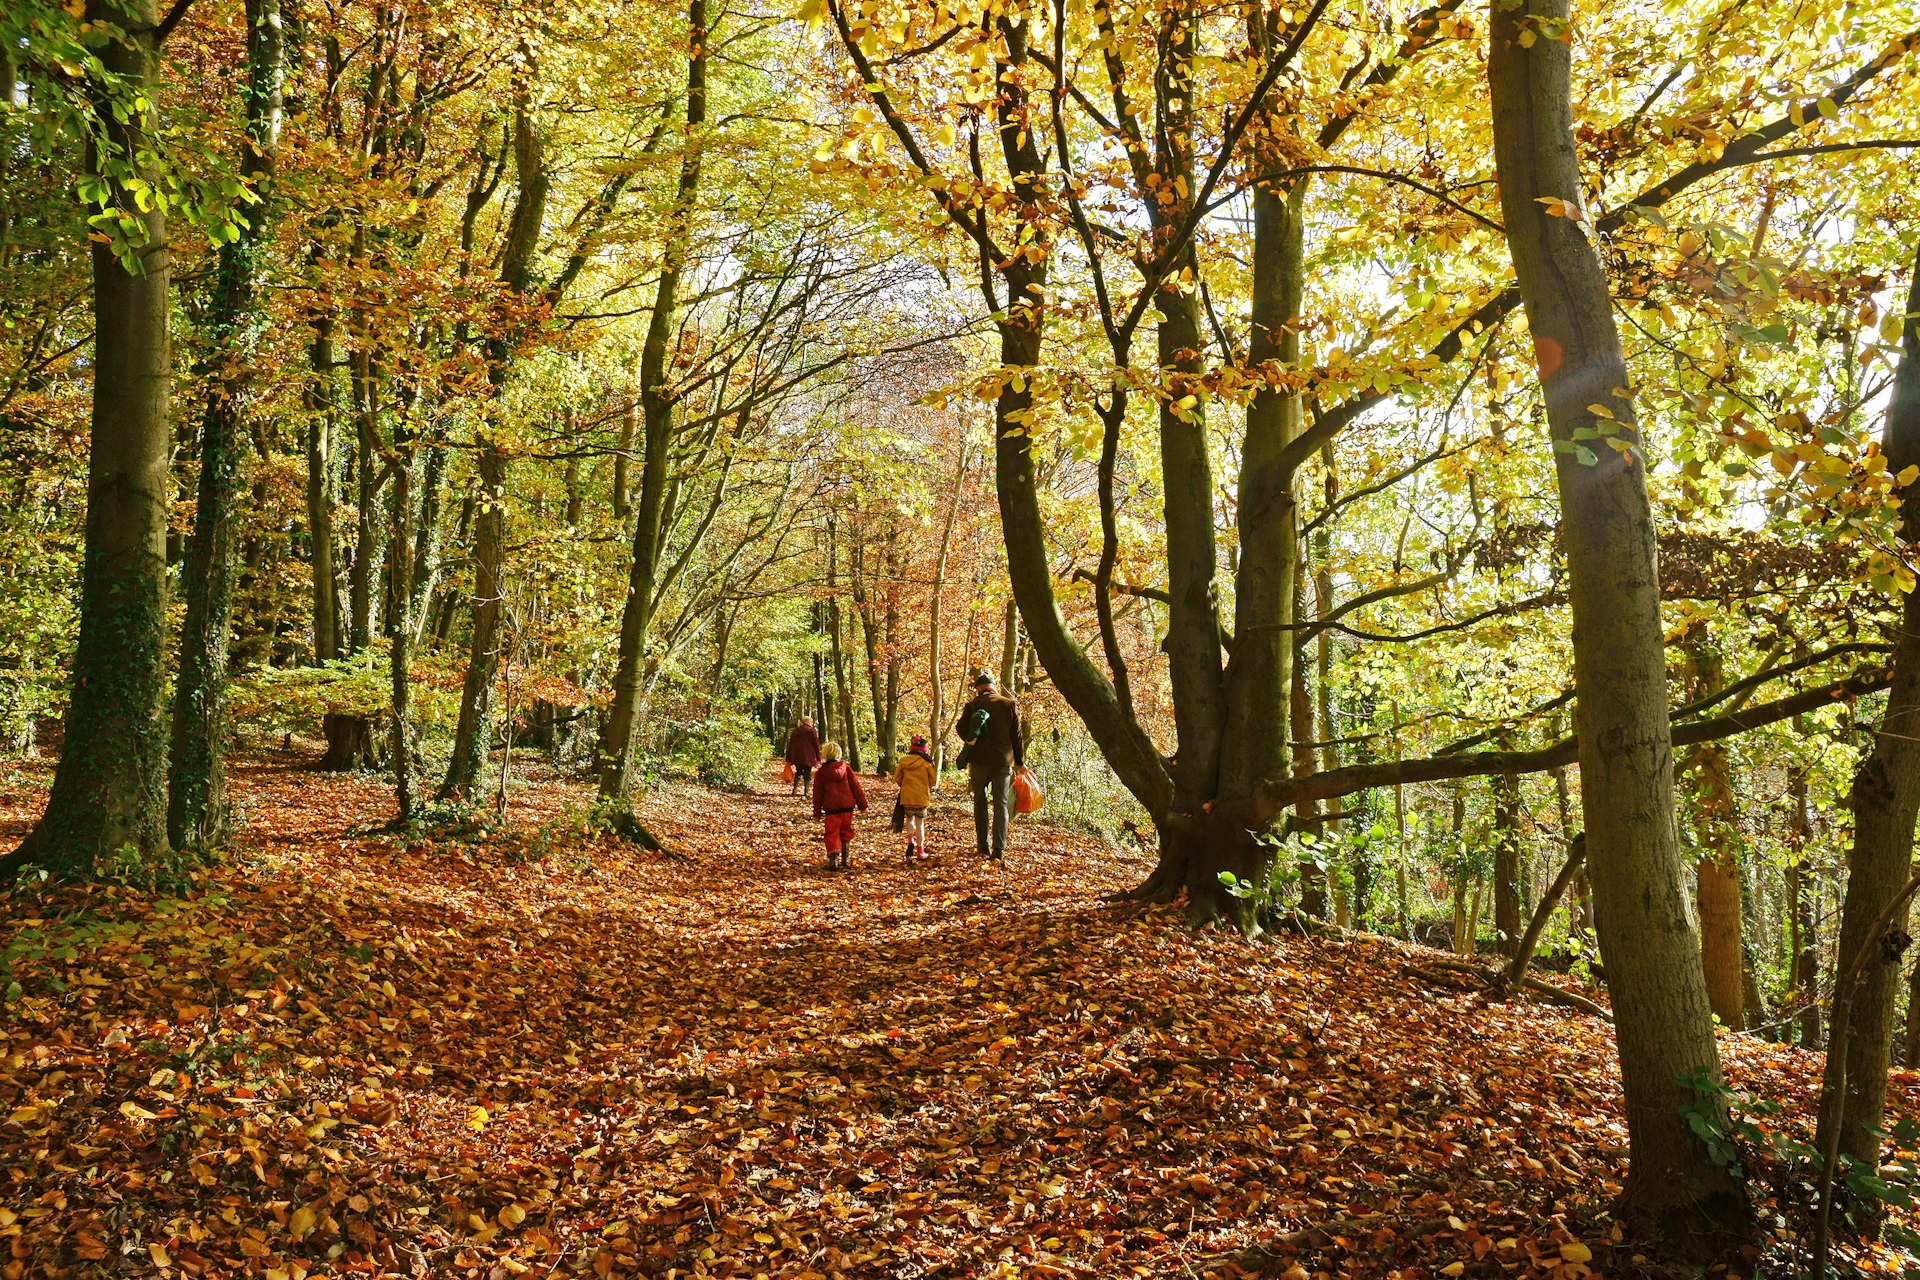 A man with children walks along a forest path in autumn in Standish Wood, Stroud, the Cotswolds, England, United Kingdom